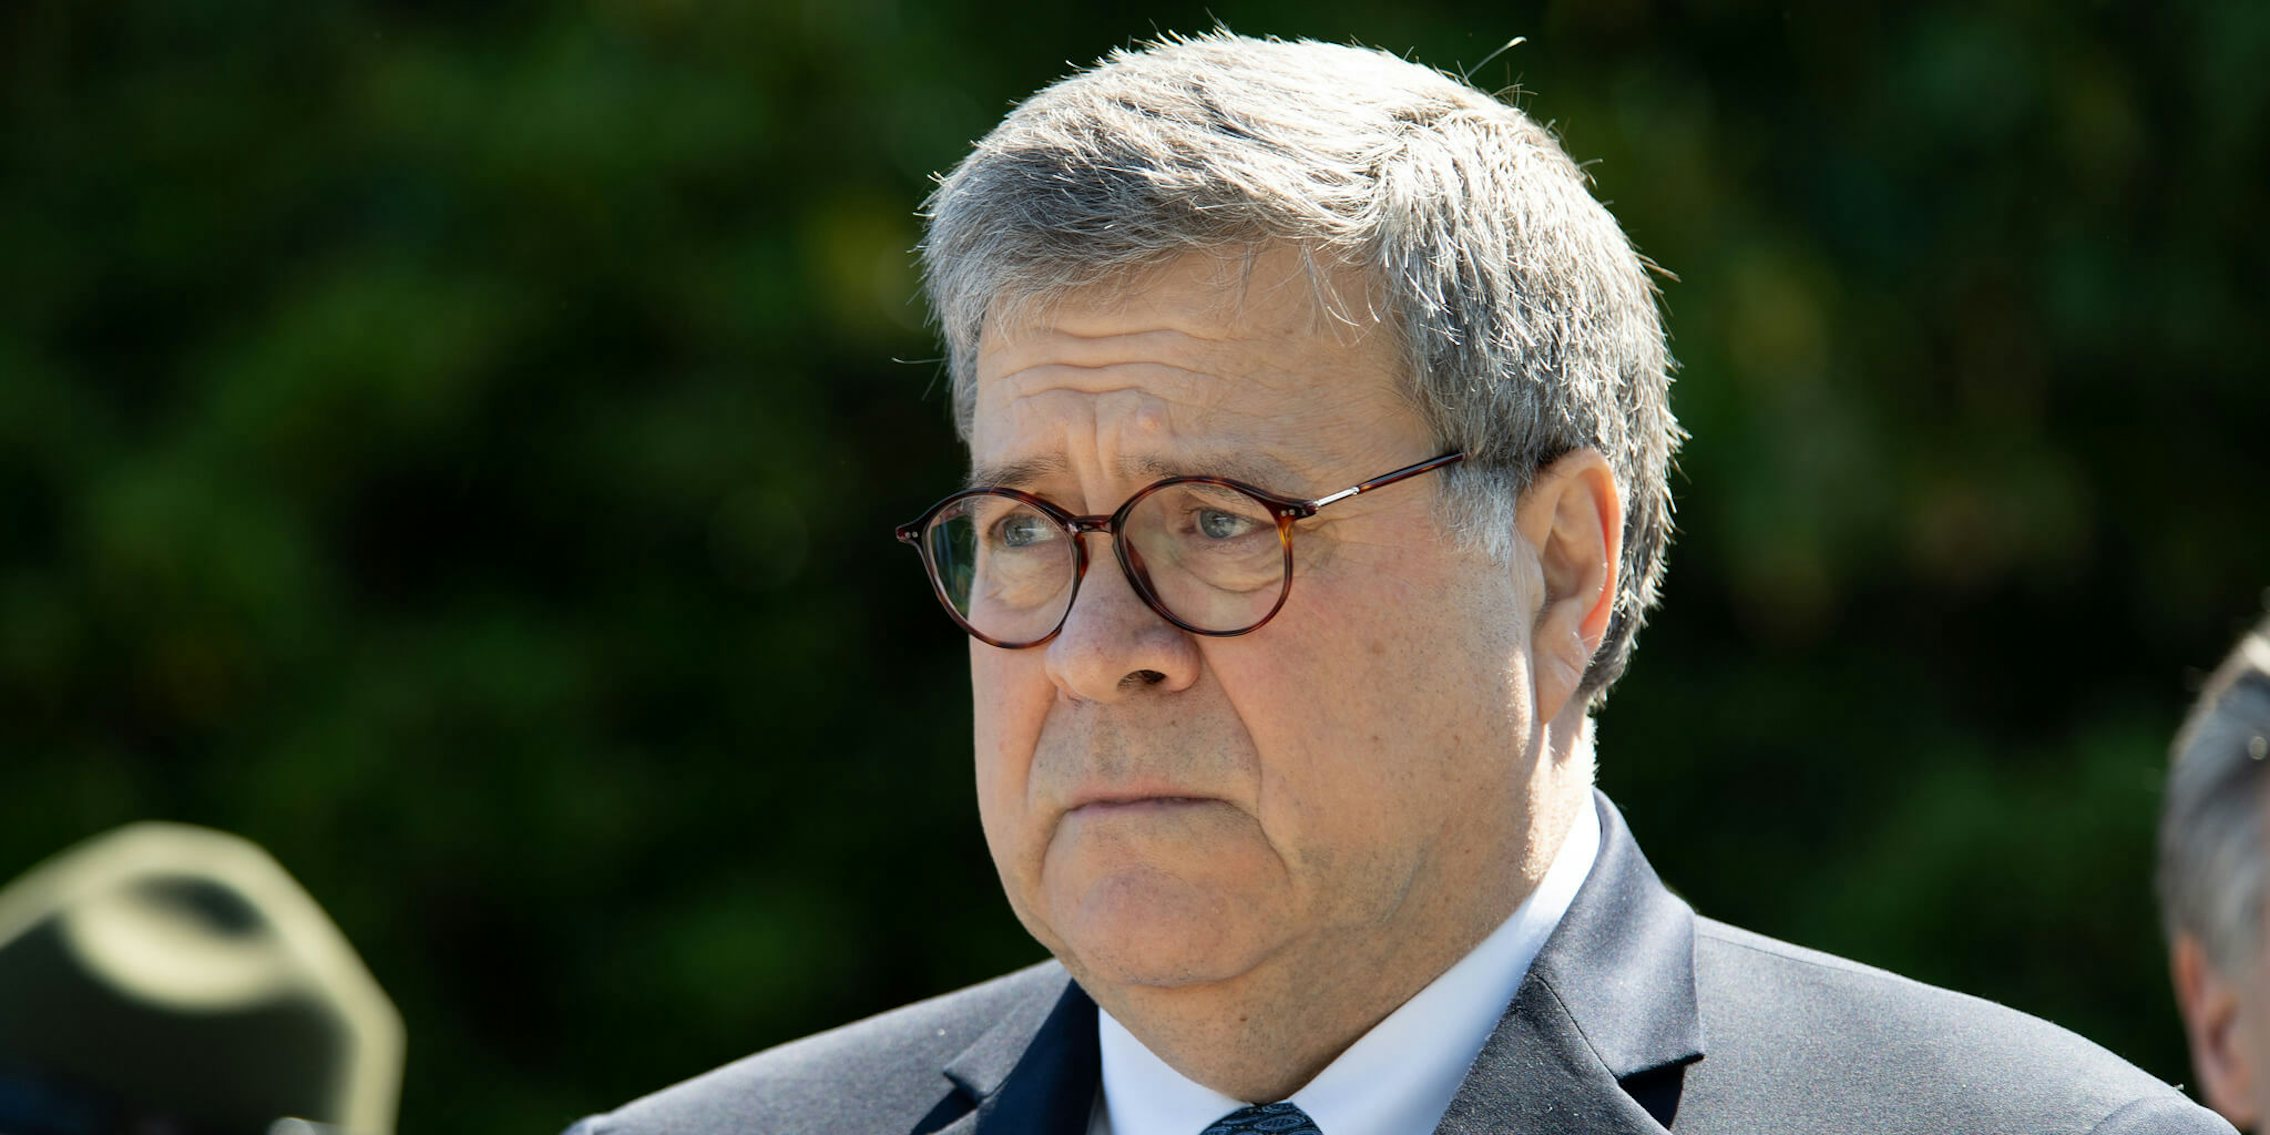 William Barr Section 230 Department of Justice